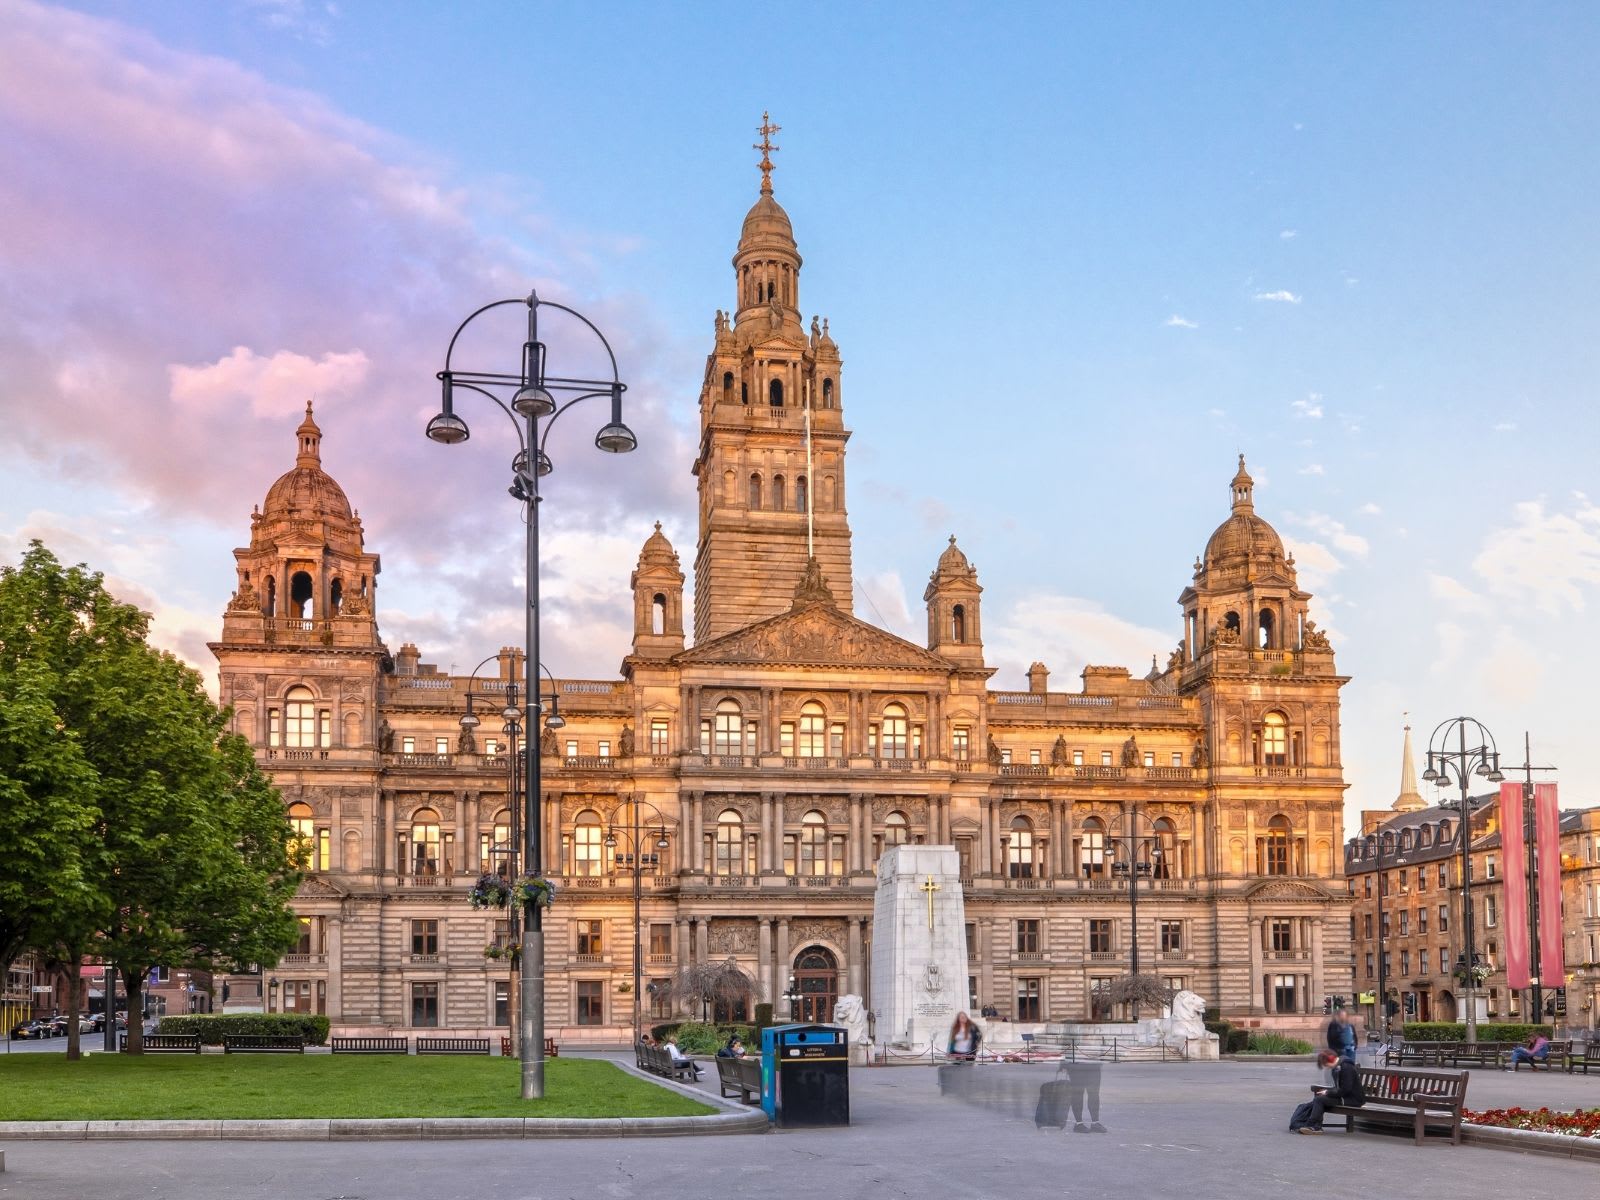 Glasgow City Chambers and George Square, Glasgow